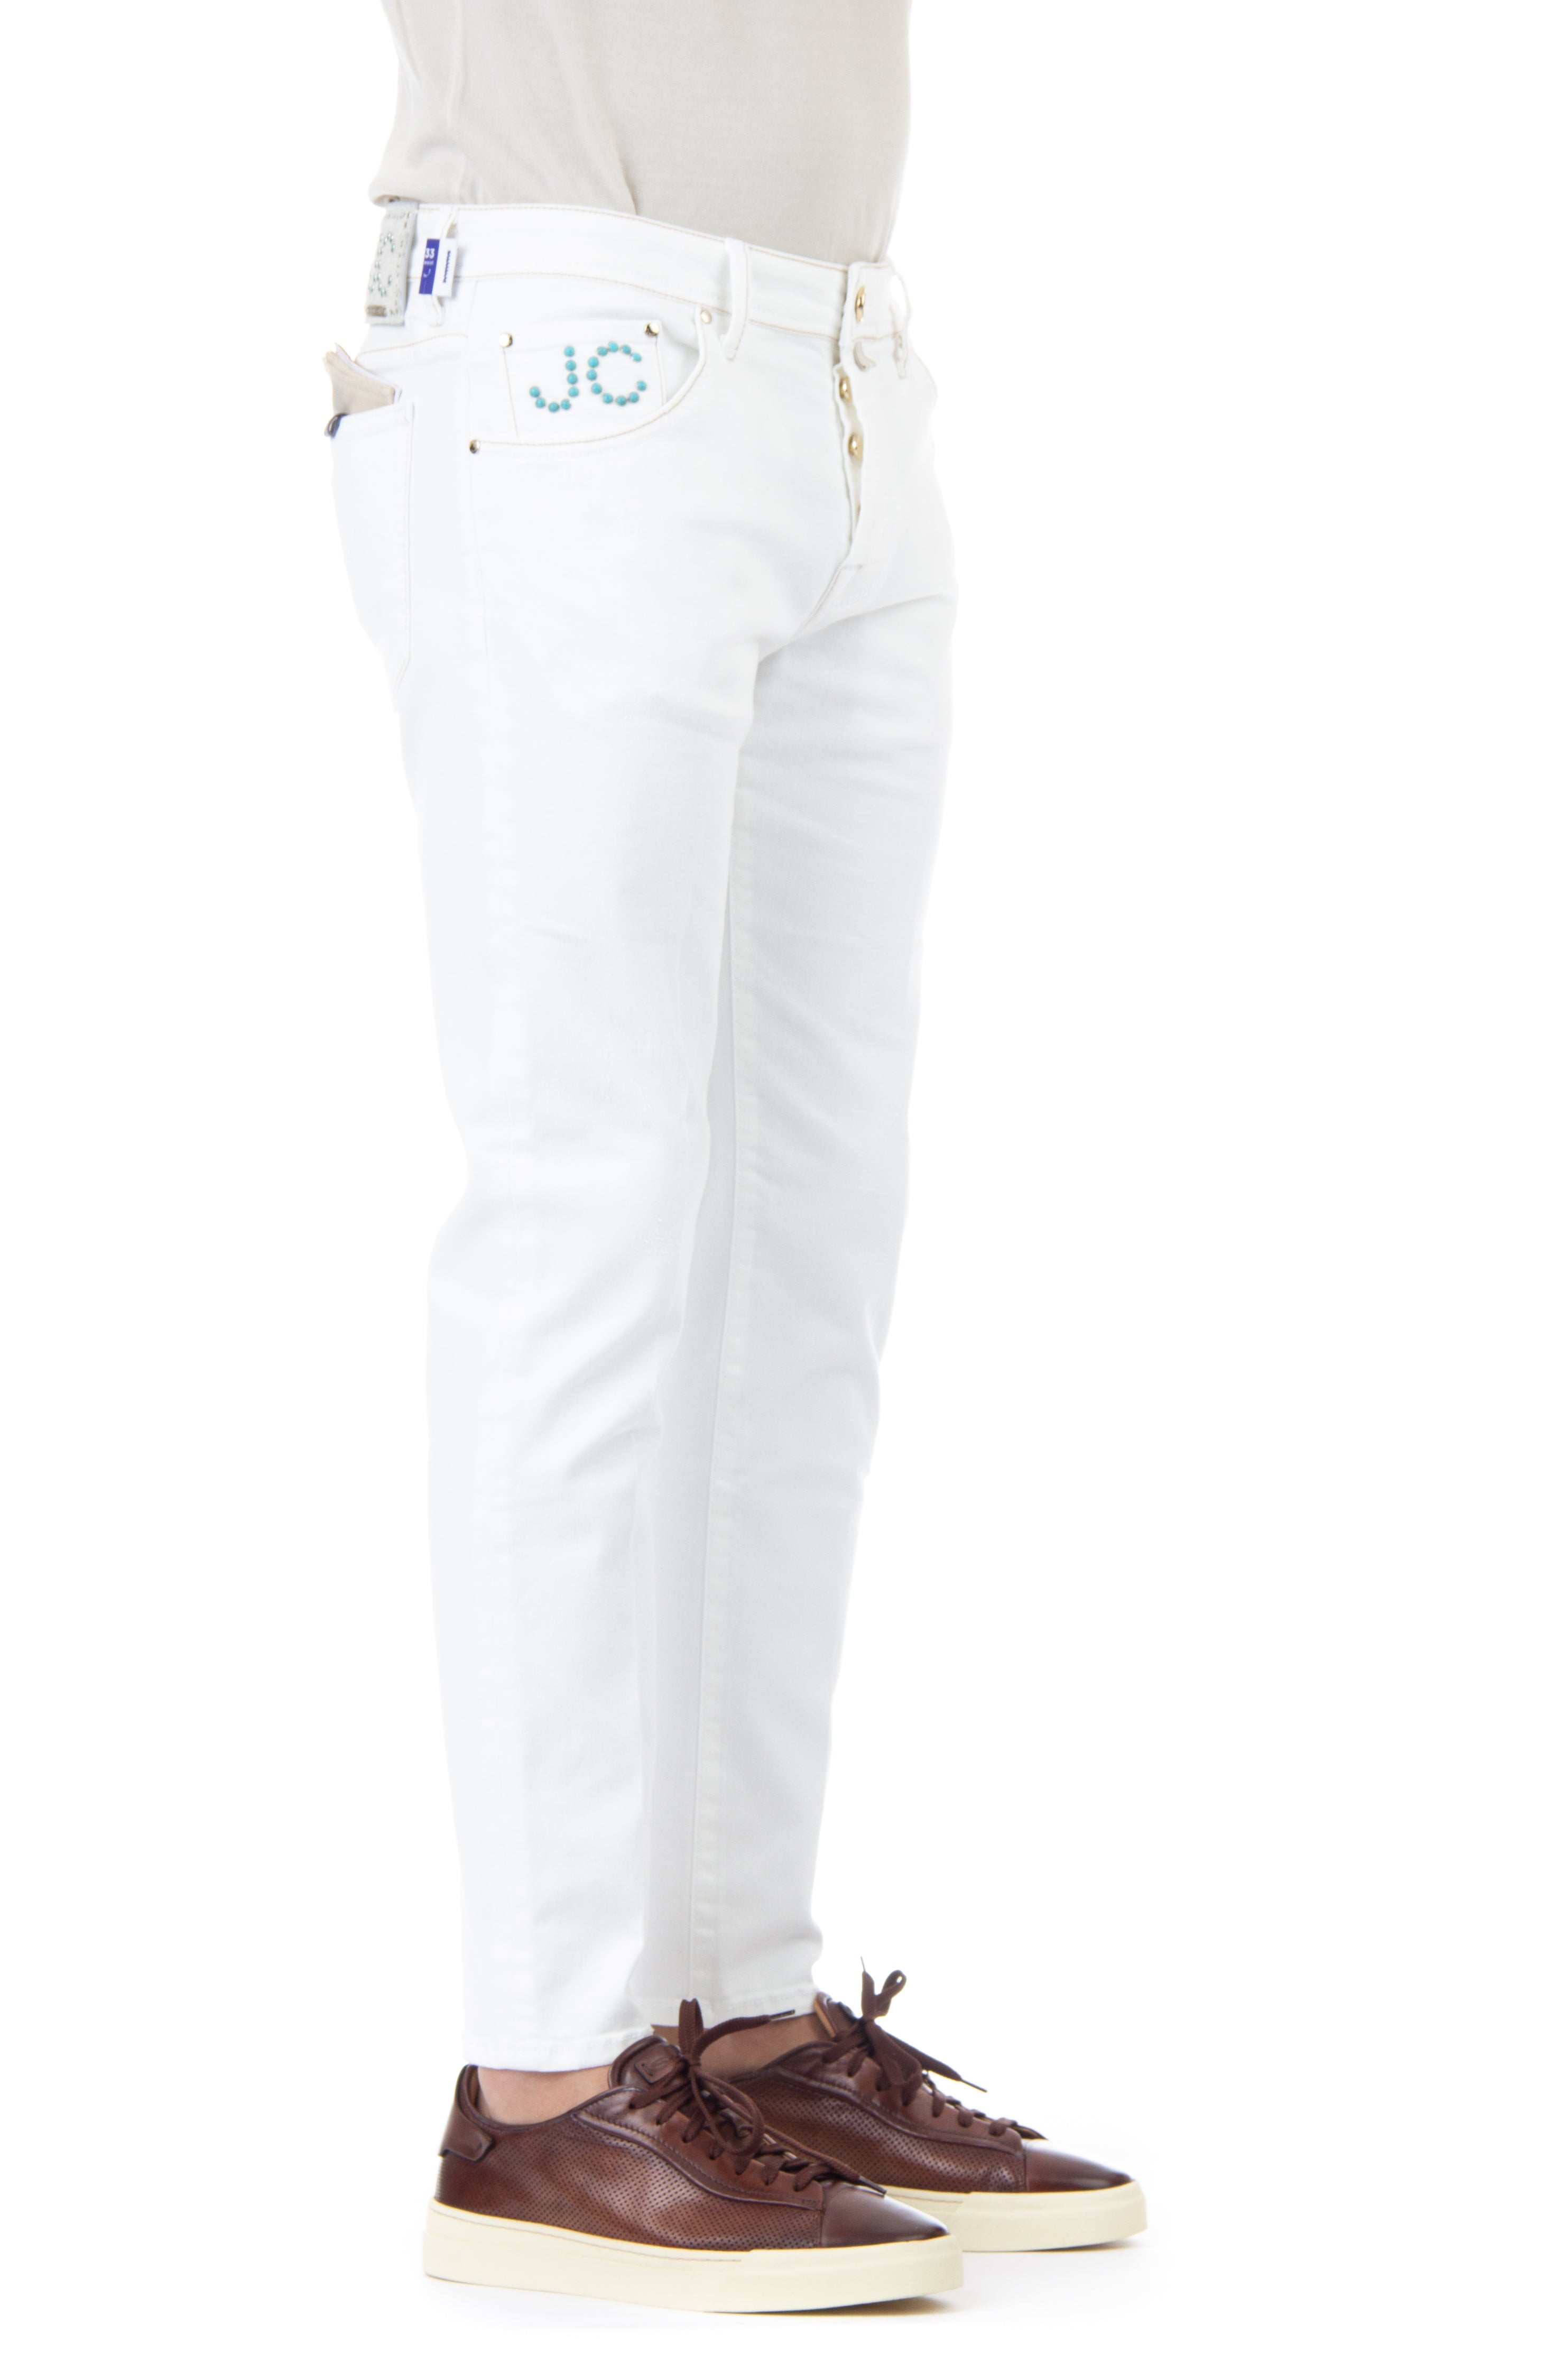 Scott fit white jeans with turquoise inlays